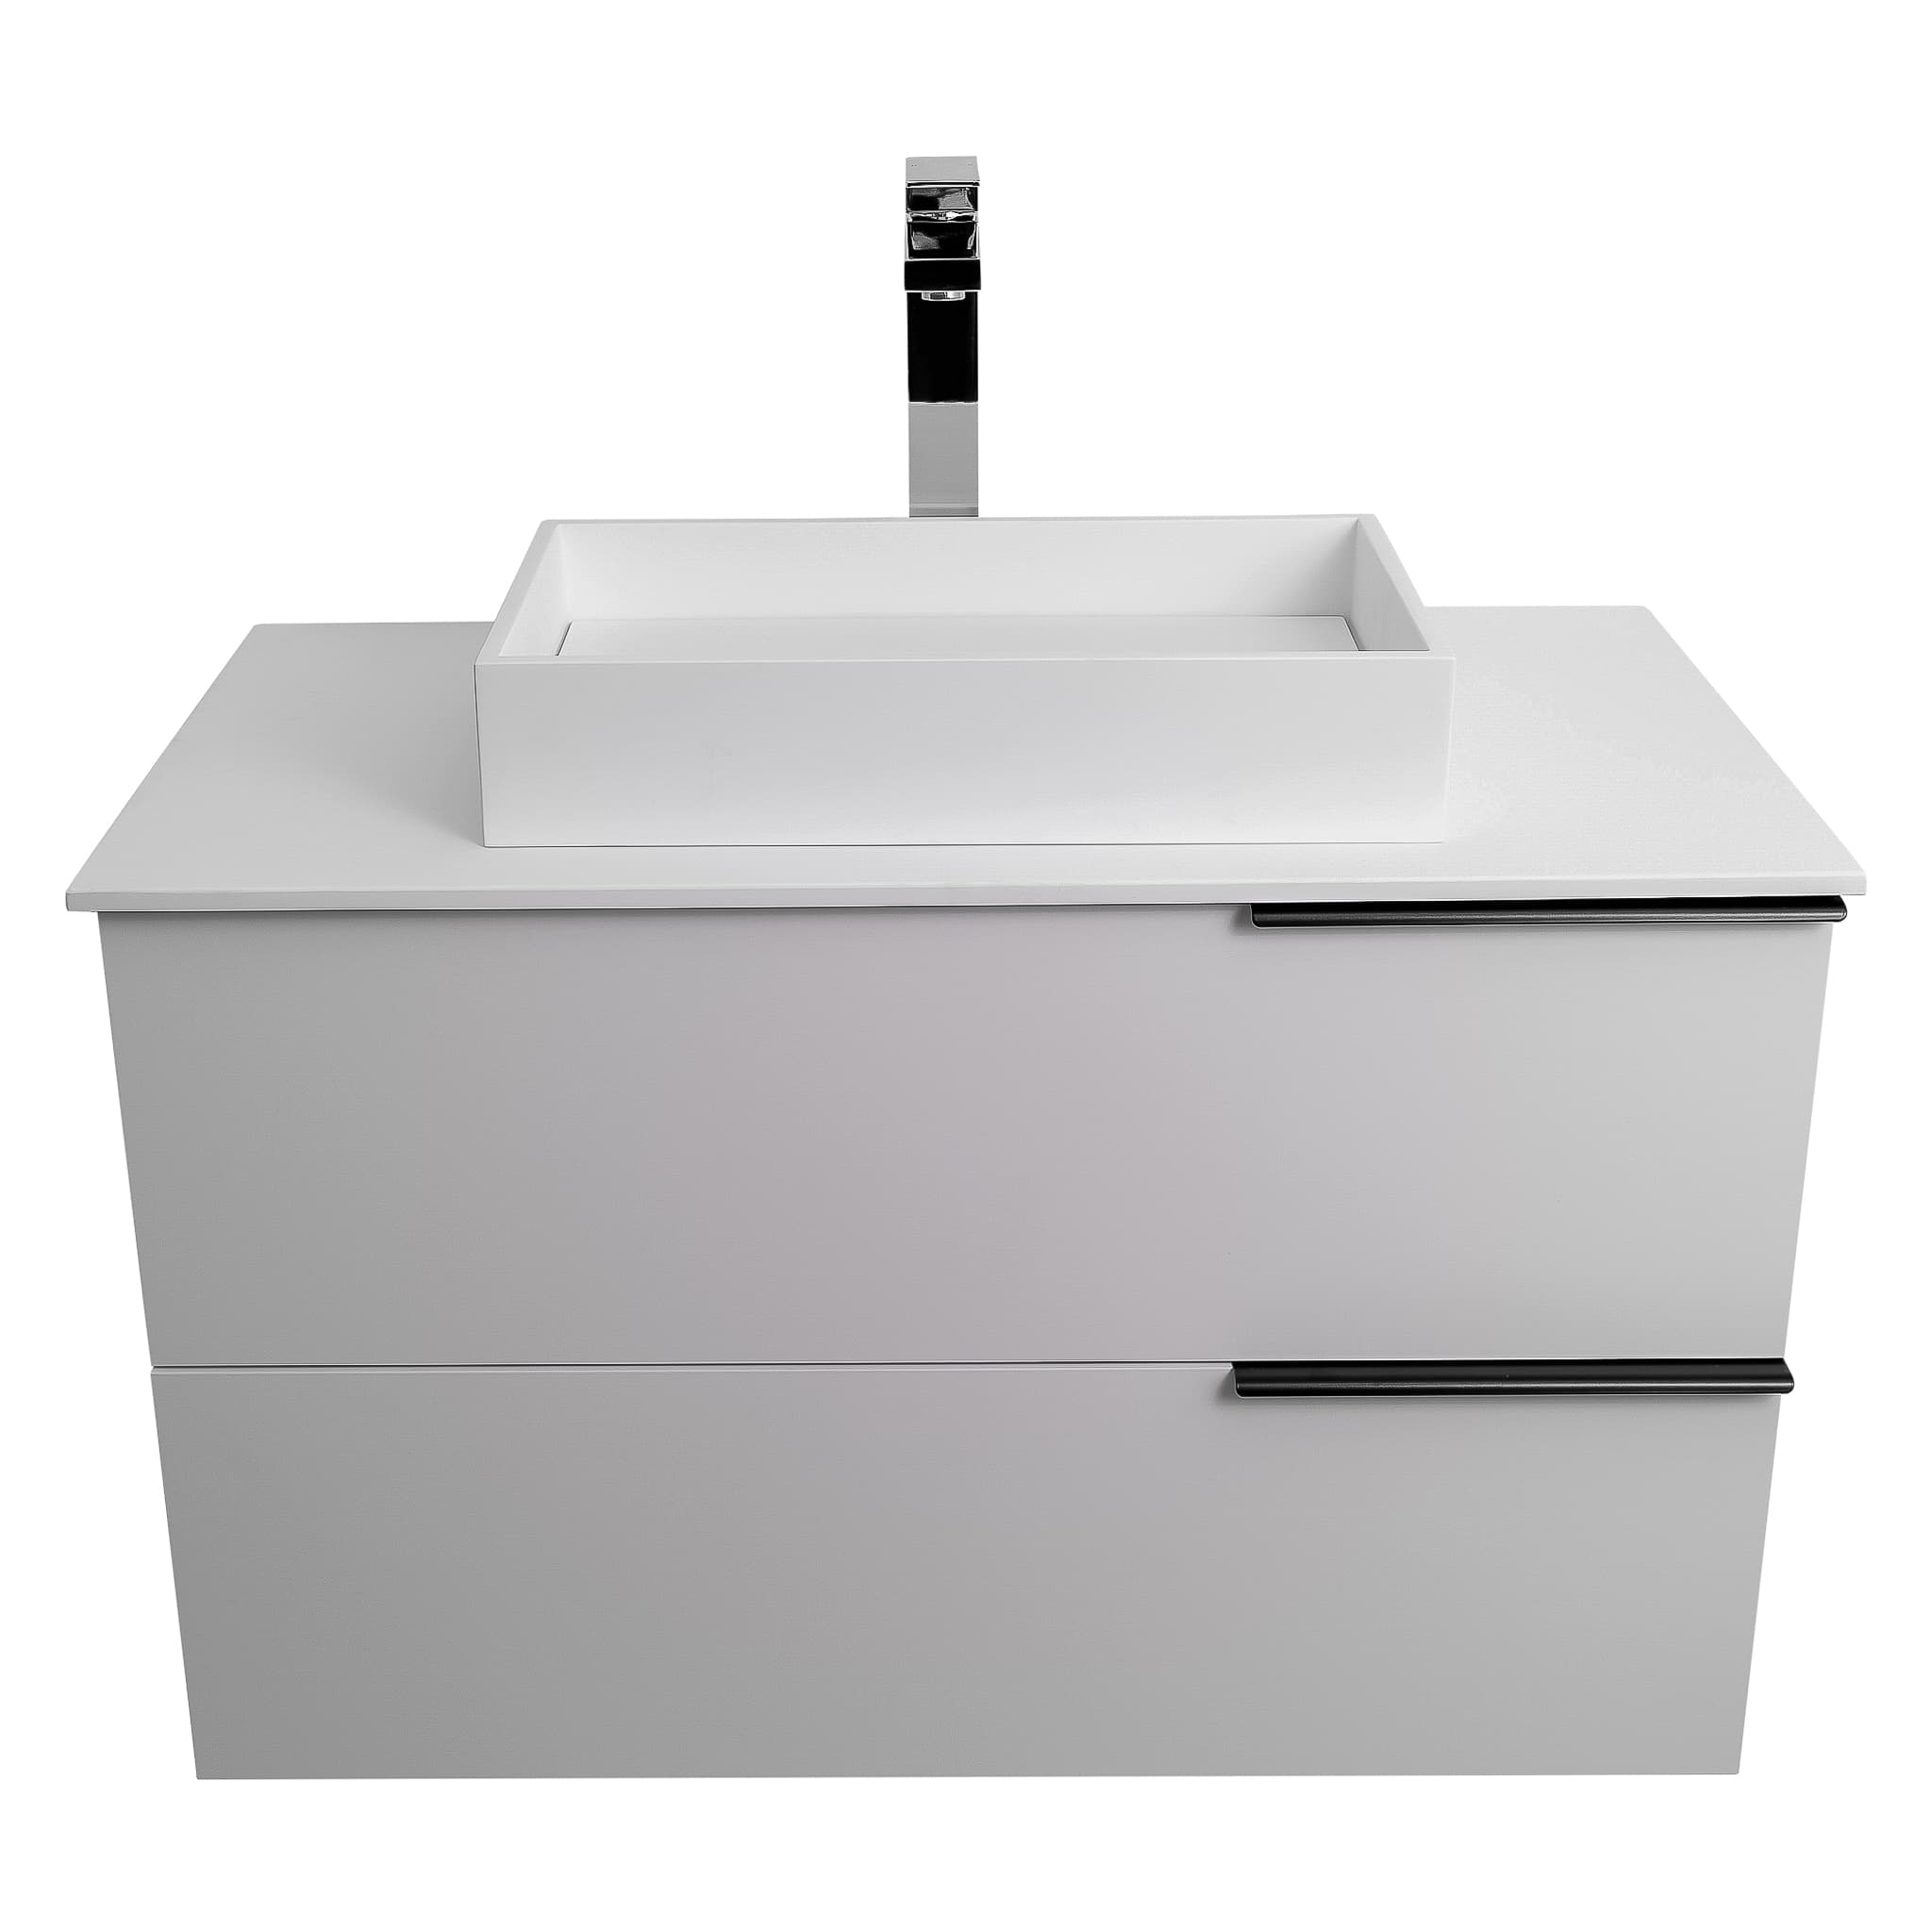 Mallorca 35.5 Matte White Cabinet, Solid Surface Flat White Counter And Infinity Square Solid Surface White Basin 1329, Wall Mounted Modern Vanity Set